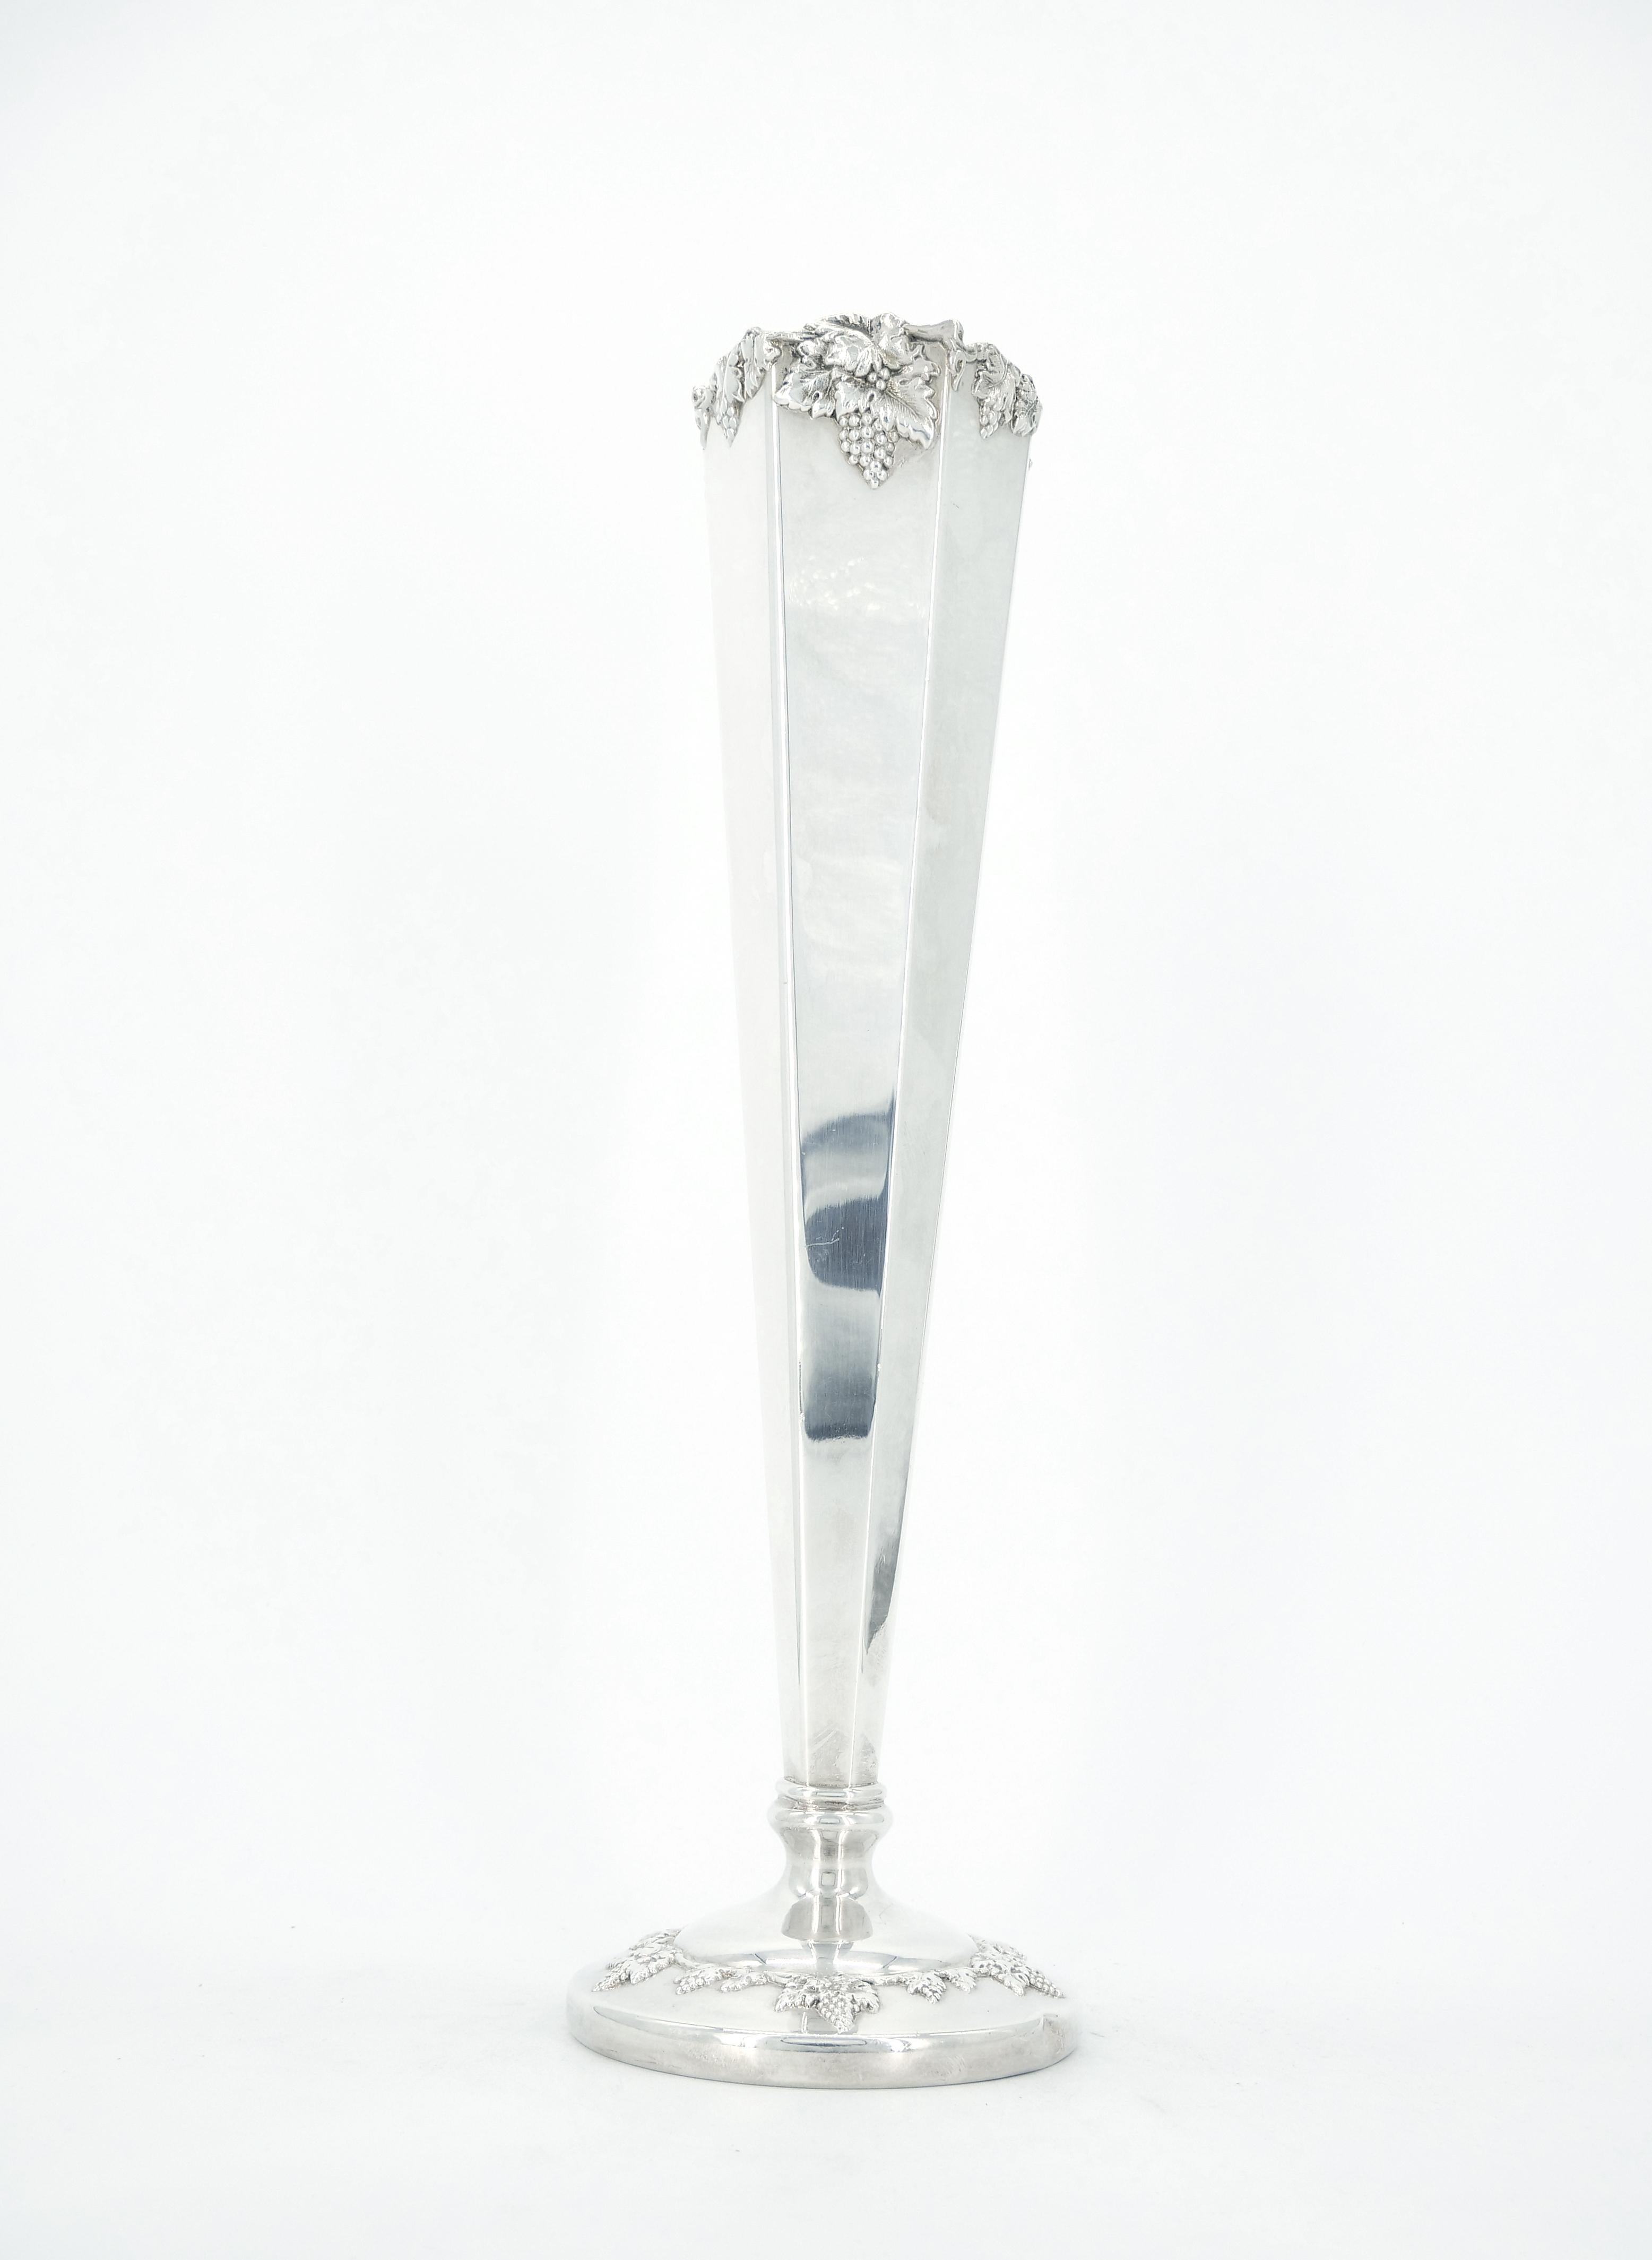 Large hexagonal tapered silverplate flower vase by Lawrence B. Smith Company of Boston, Massachusetts, with fine repeating grapevine motif decorating the rim and foot.  Founded in 1887, the firm operated into the 1950s.  5 inches across and 16